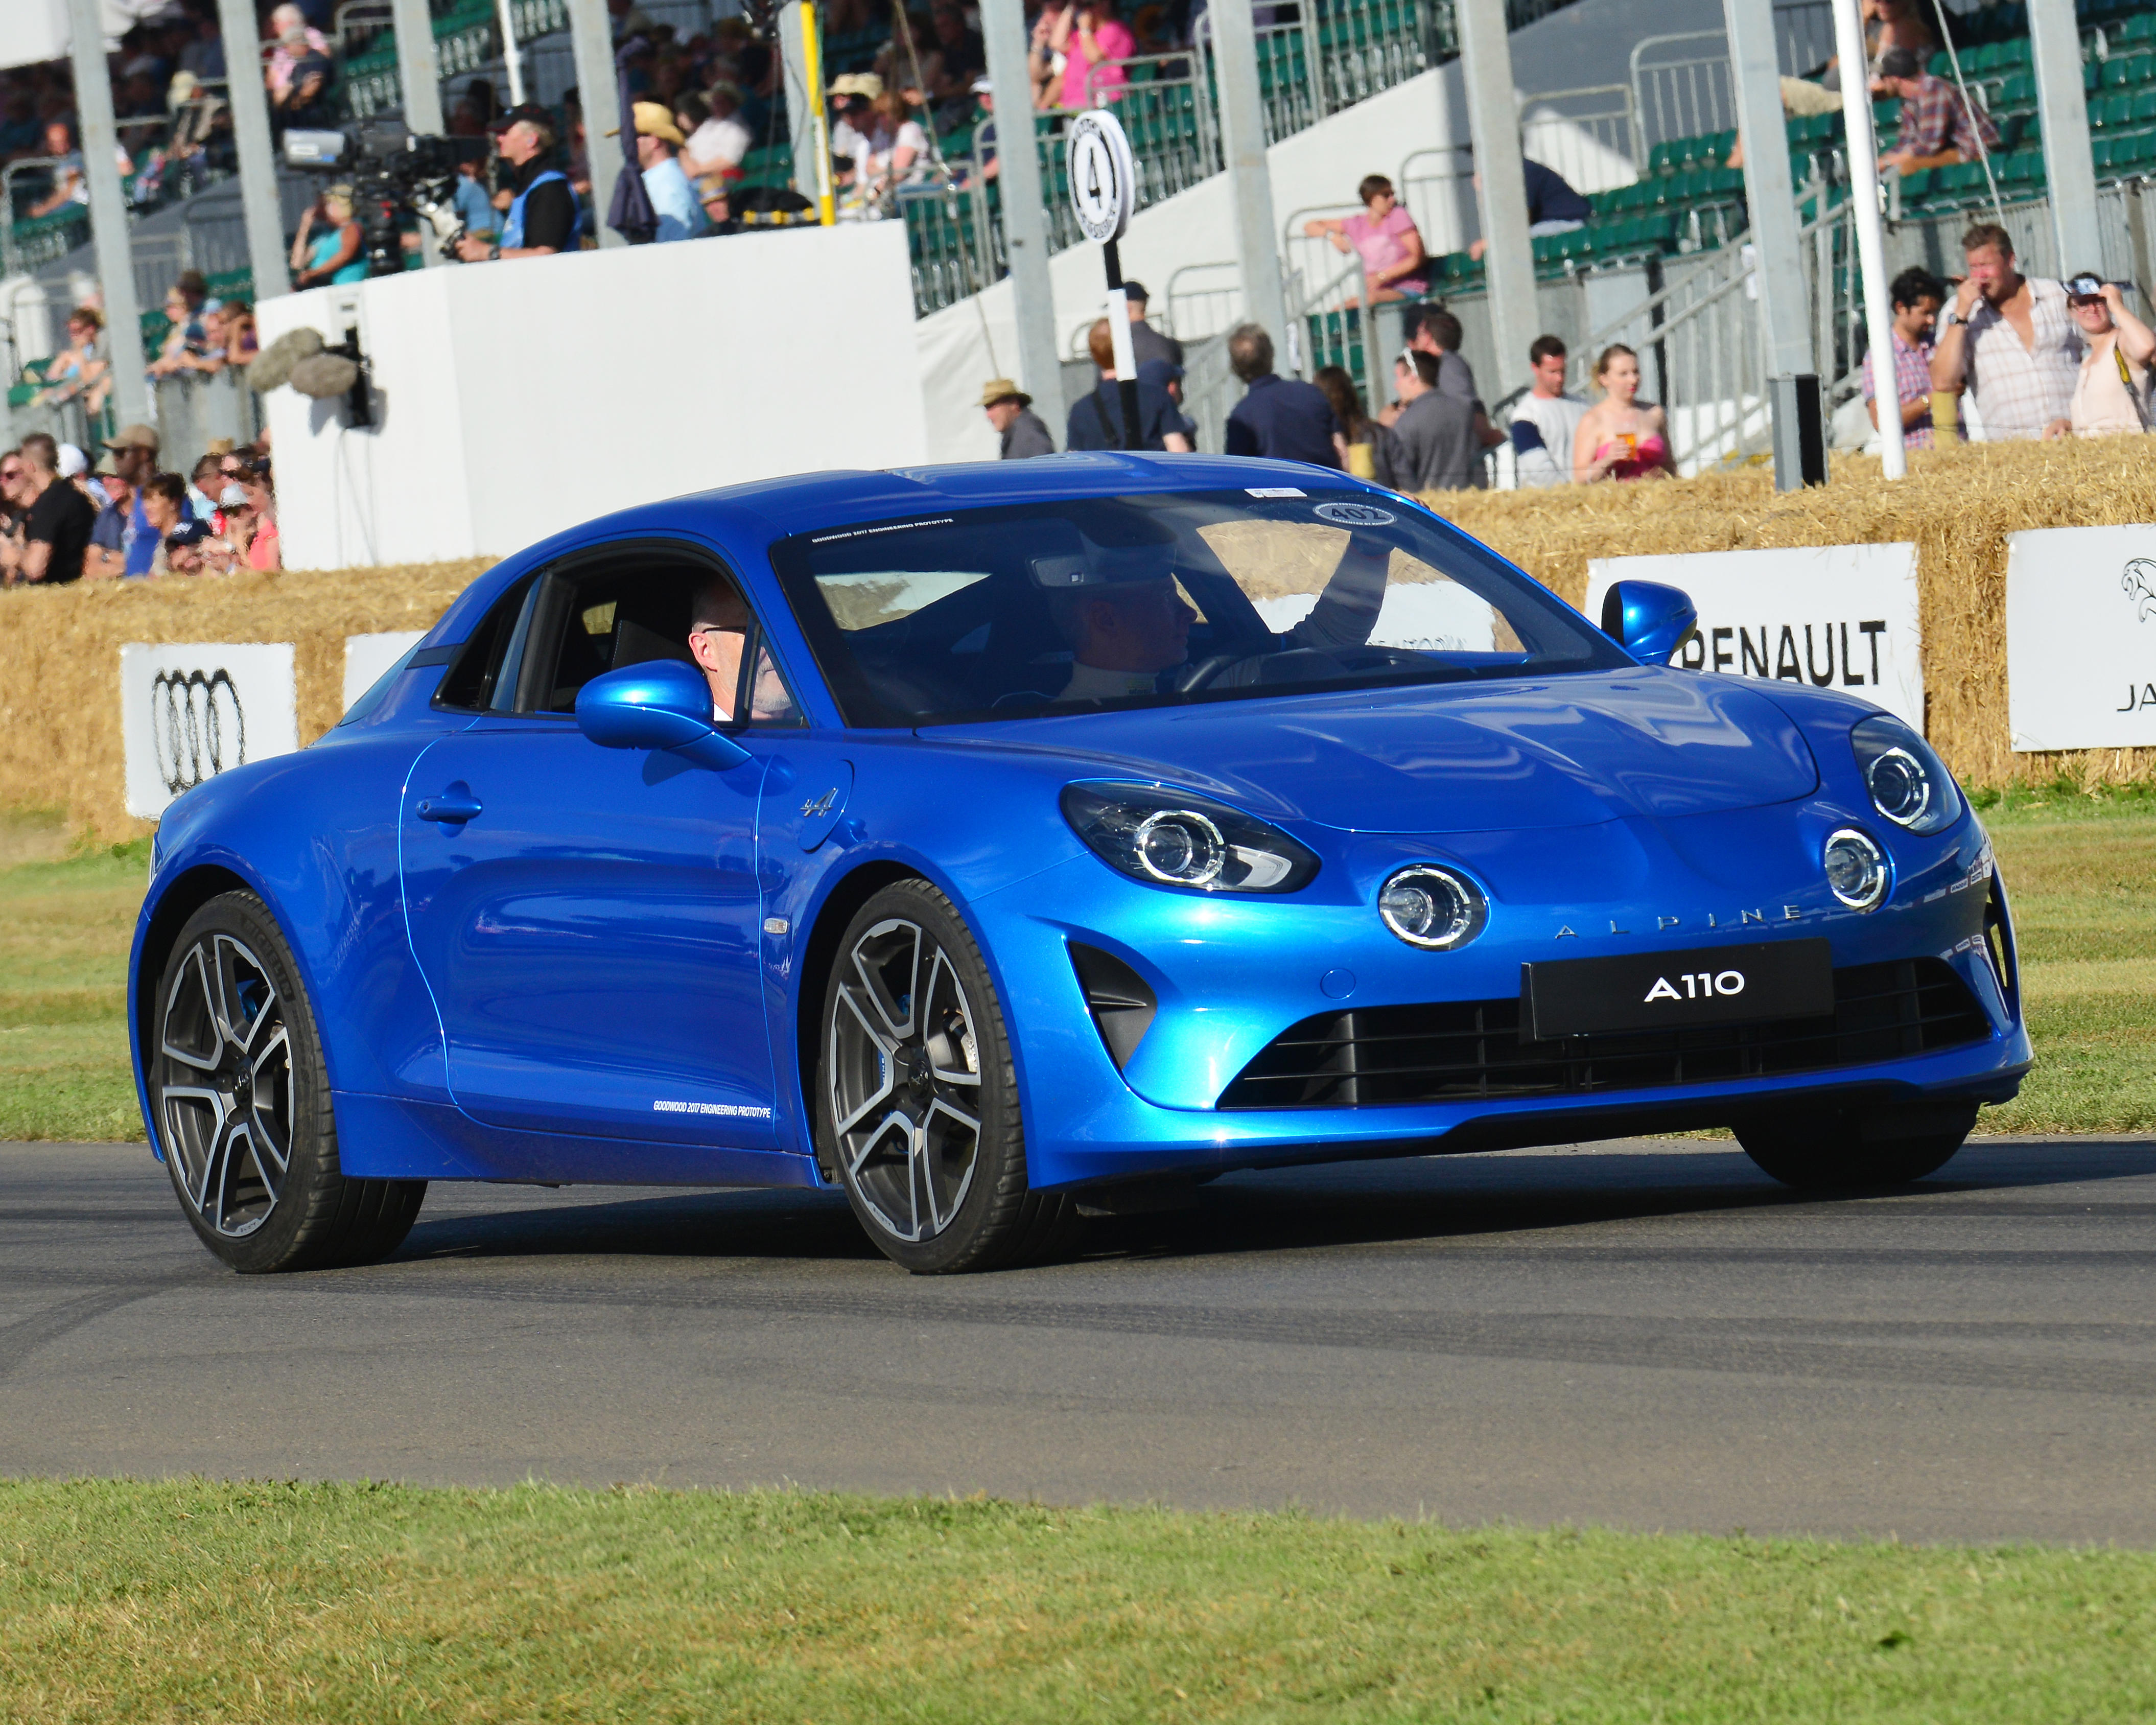 The A110's price will start at a whopping £215,000